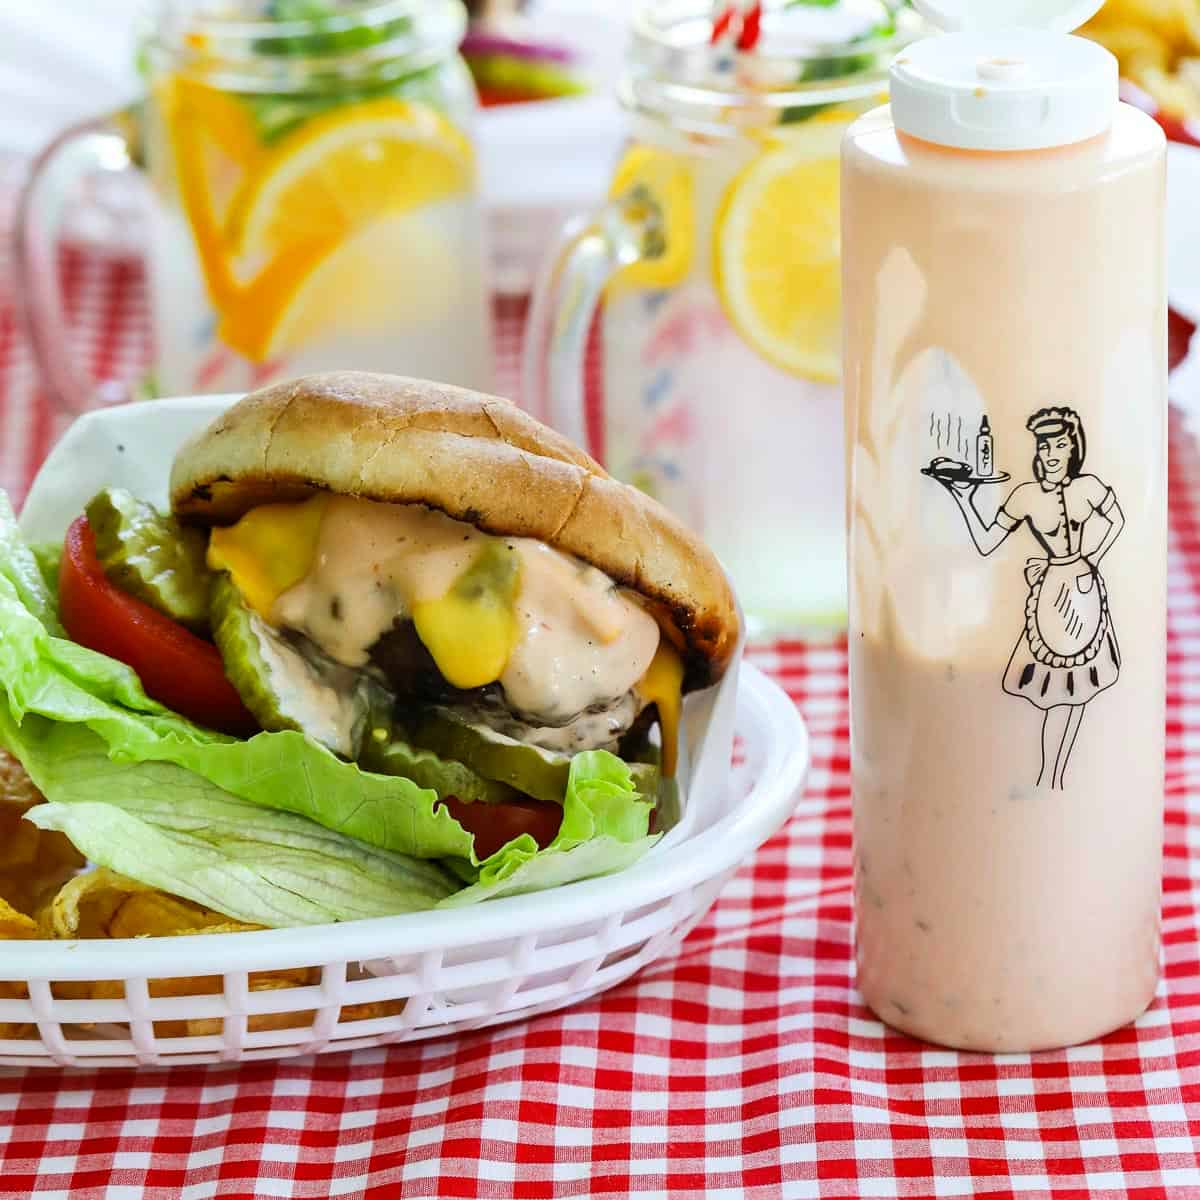 A messy grilled burger topped with lettuce, tomato, cheese, pickles and burger sauce in a basket with a bottle of burger sauce.